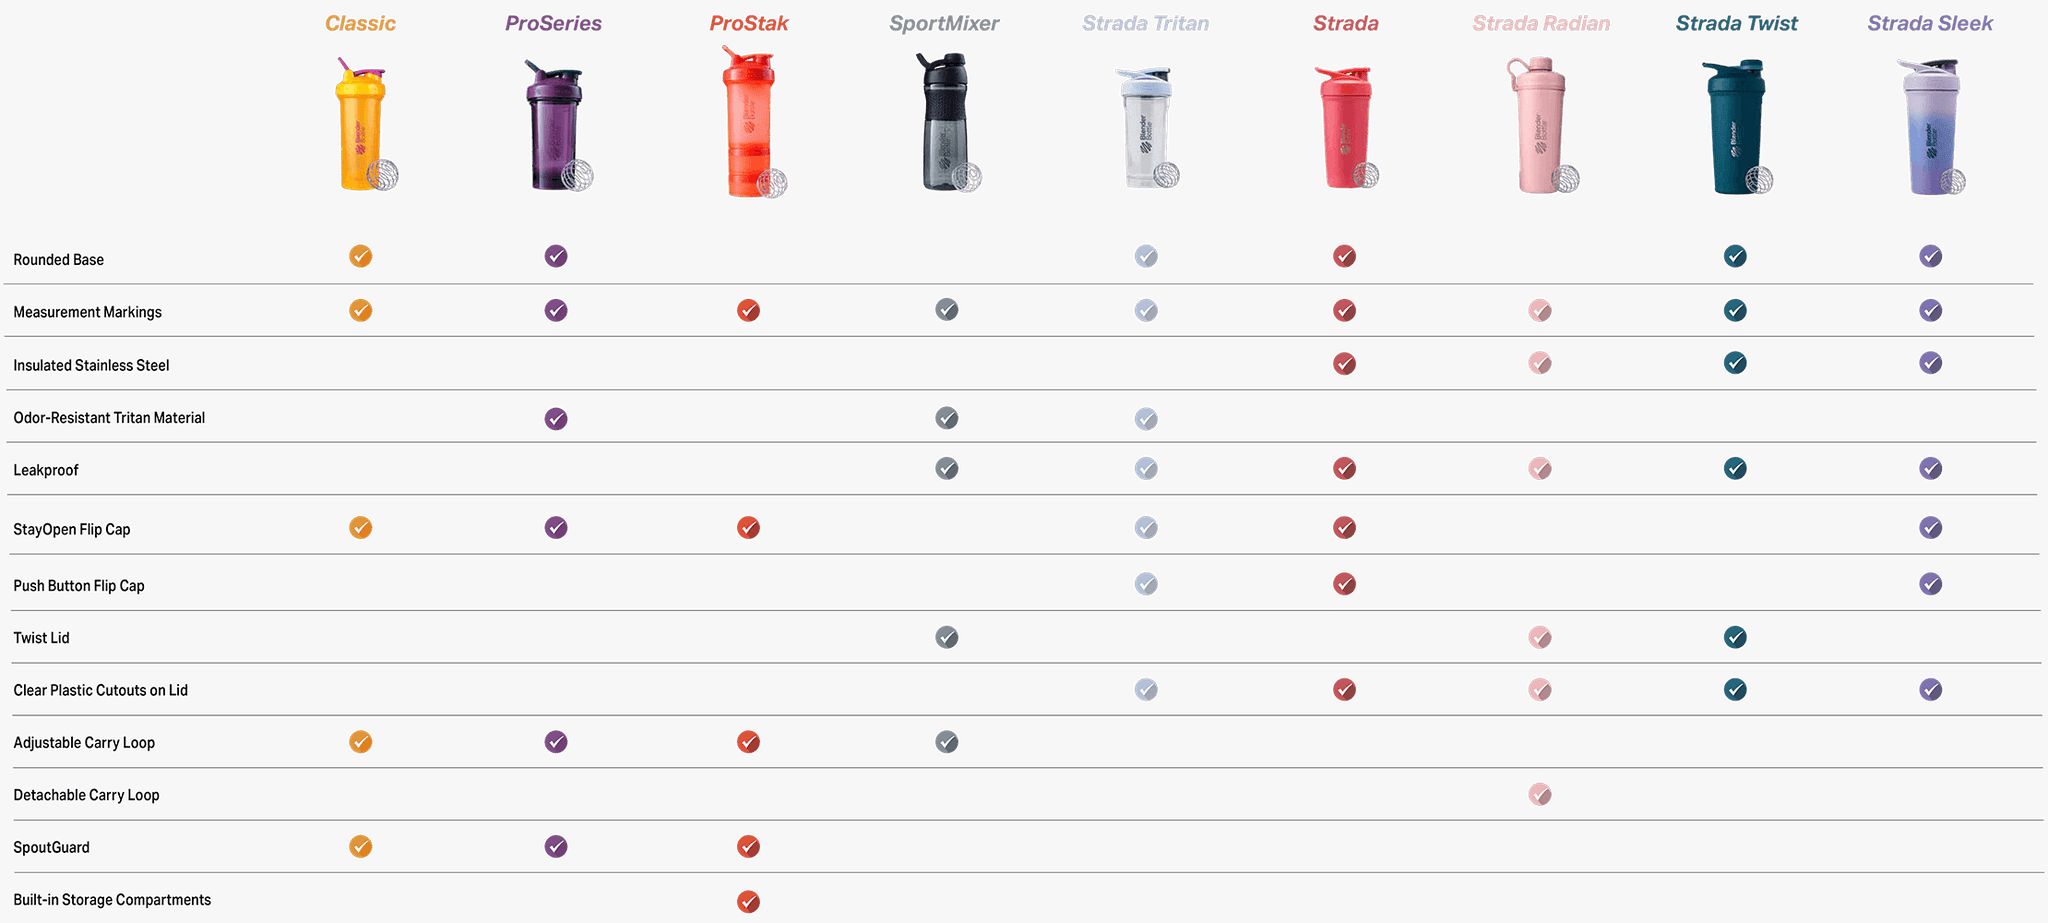 Best Shaker Cups and Shaker Bottles Comparison